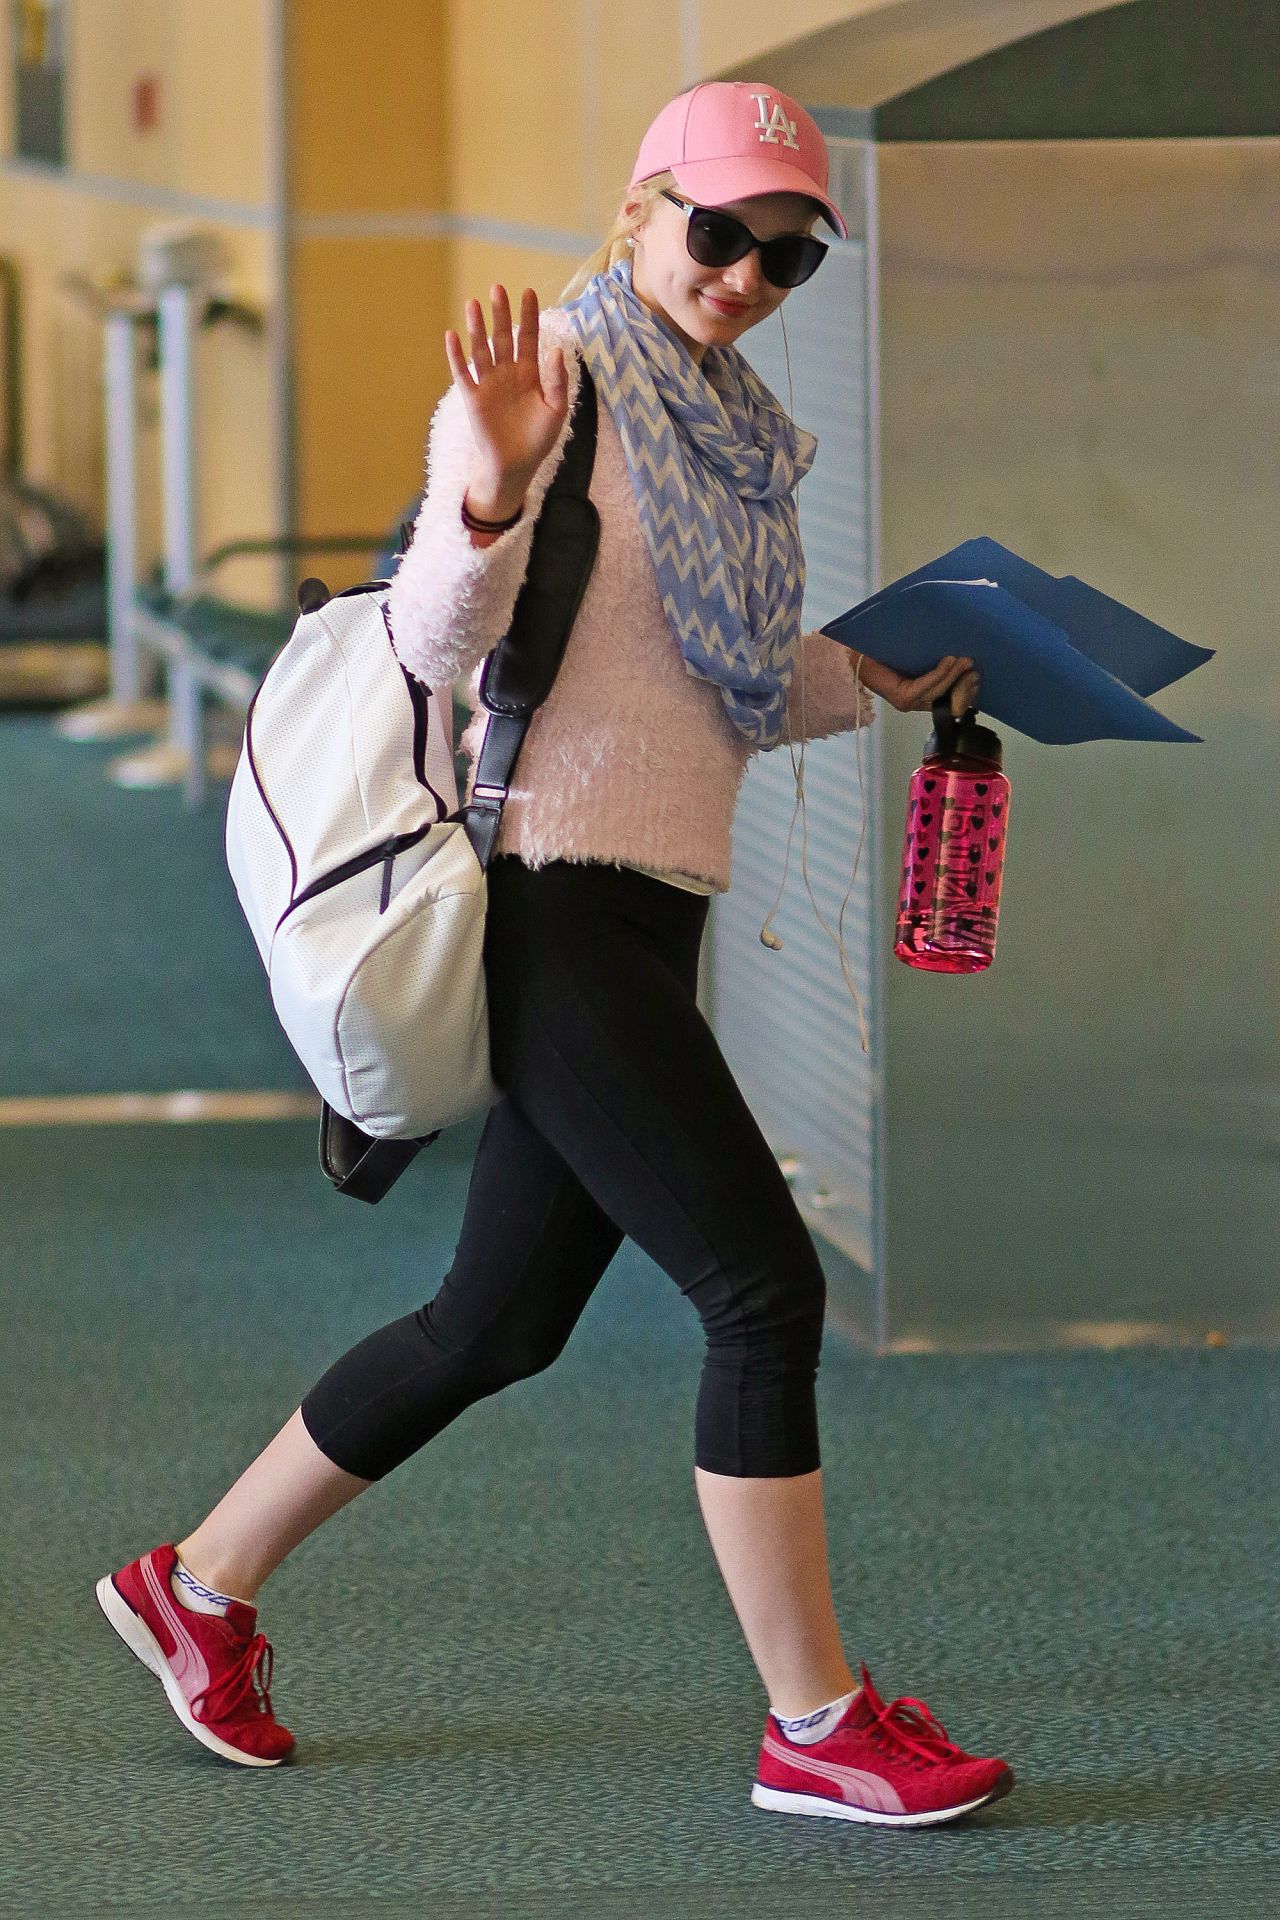 Dove Cameron Booty in Leggings - Vancouver Airport, February 2015